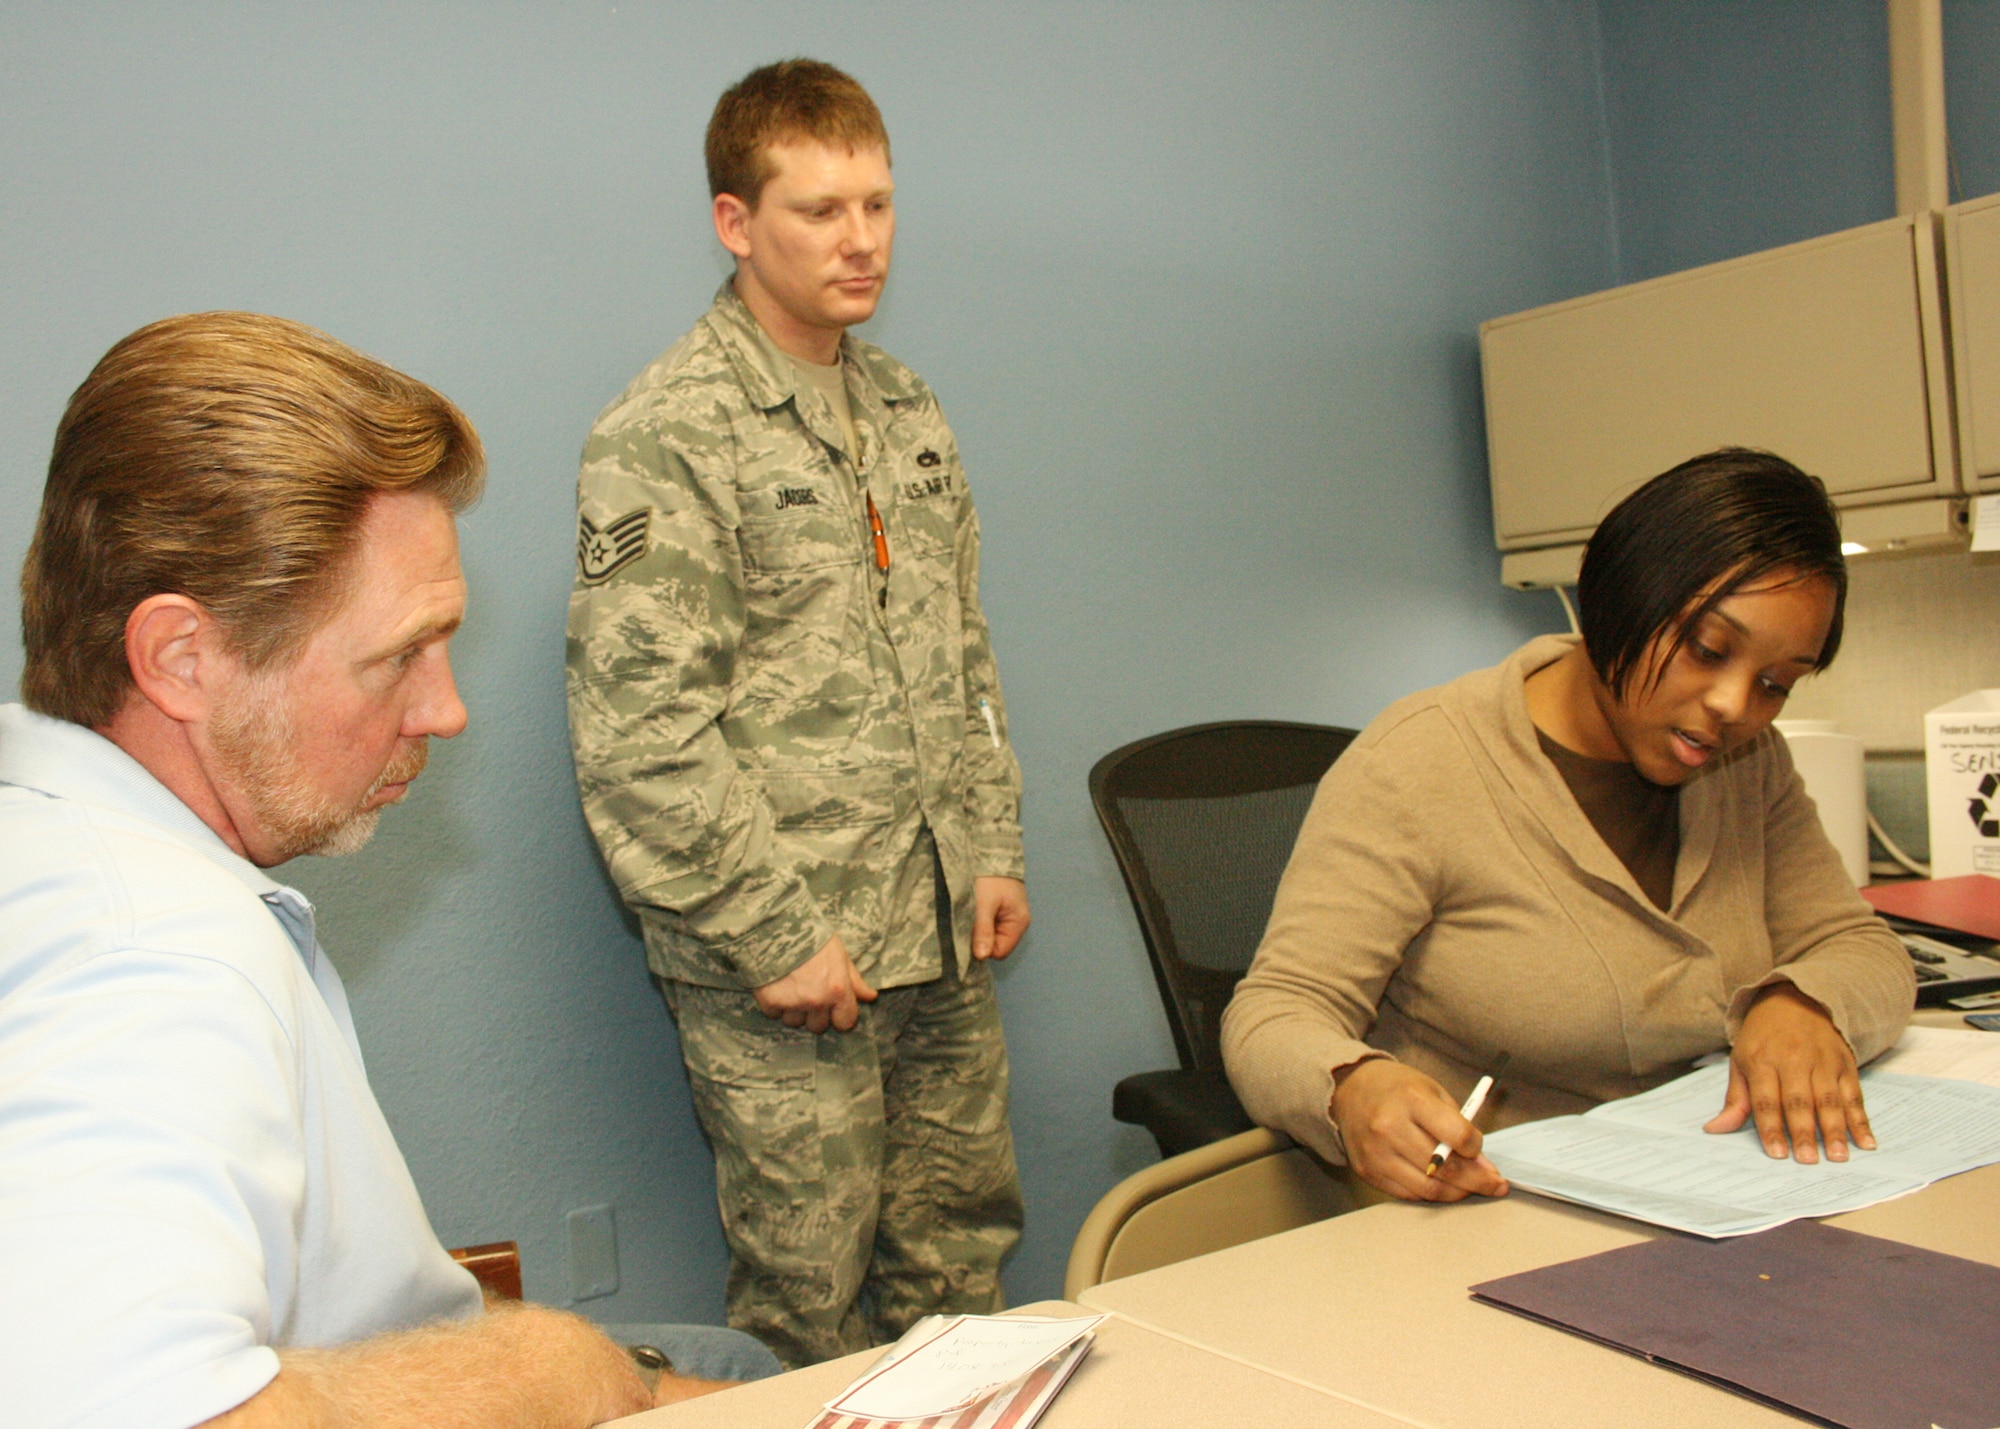 EGLIN AIR FORCE BASE, Fla. - Volunteers at the Eglin tax center help military, dependent, retired, and DoD civilian customers prepare and file their federal and state tax returns. Located across 2nd street from the base education center, the tax center is open Monday through Friday from 8 to 11 a.m. and 12:30 to 3:30 p.m. Wednesday is reserved for 1040EZ filing members. For all other times, call 882-1040 to make an appointment. (U.S. Air Force photos by 2nd Lt. Andrew Caulk)